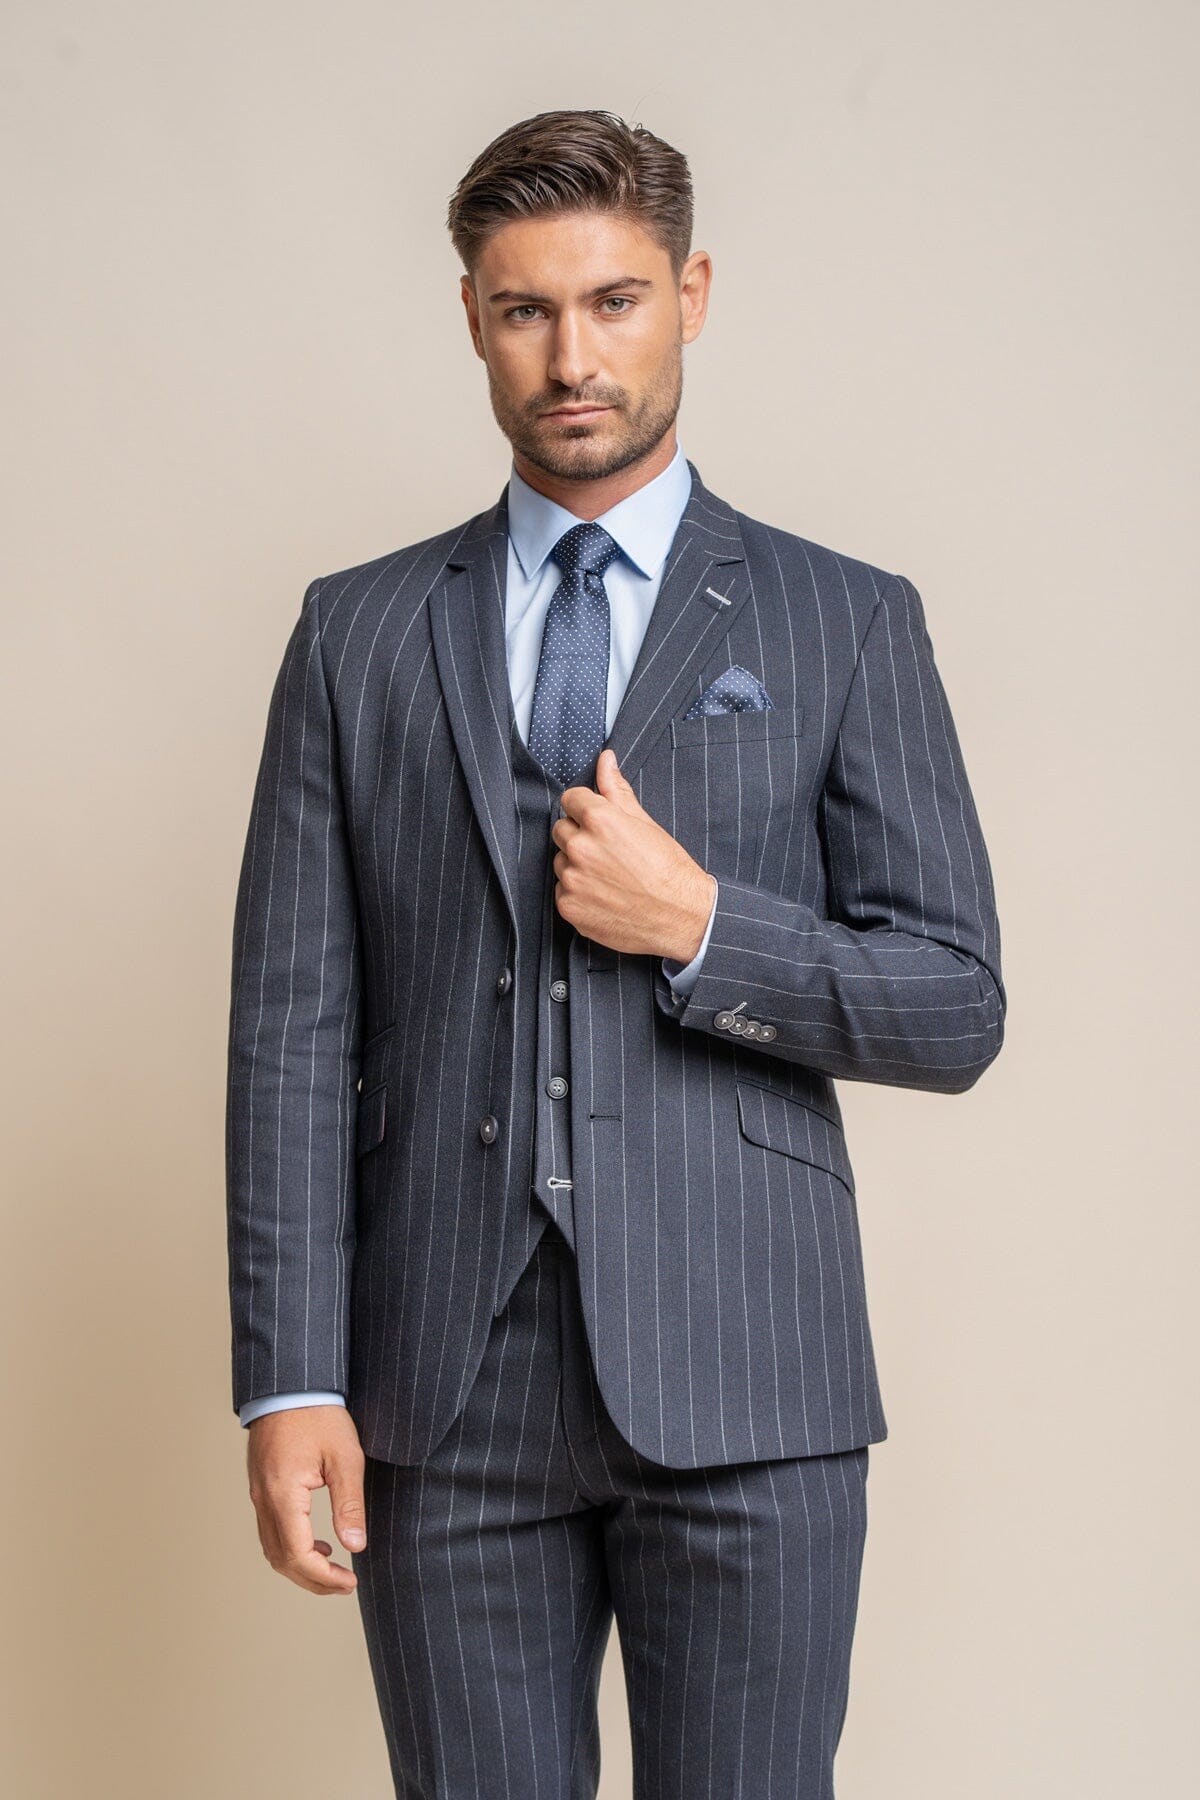 Invincible Navy Pinstripe Suit Swatch - Swatch - 